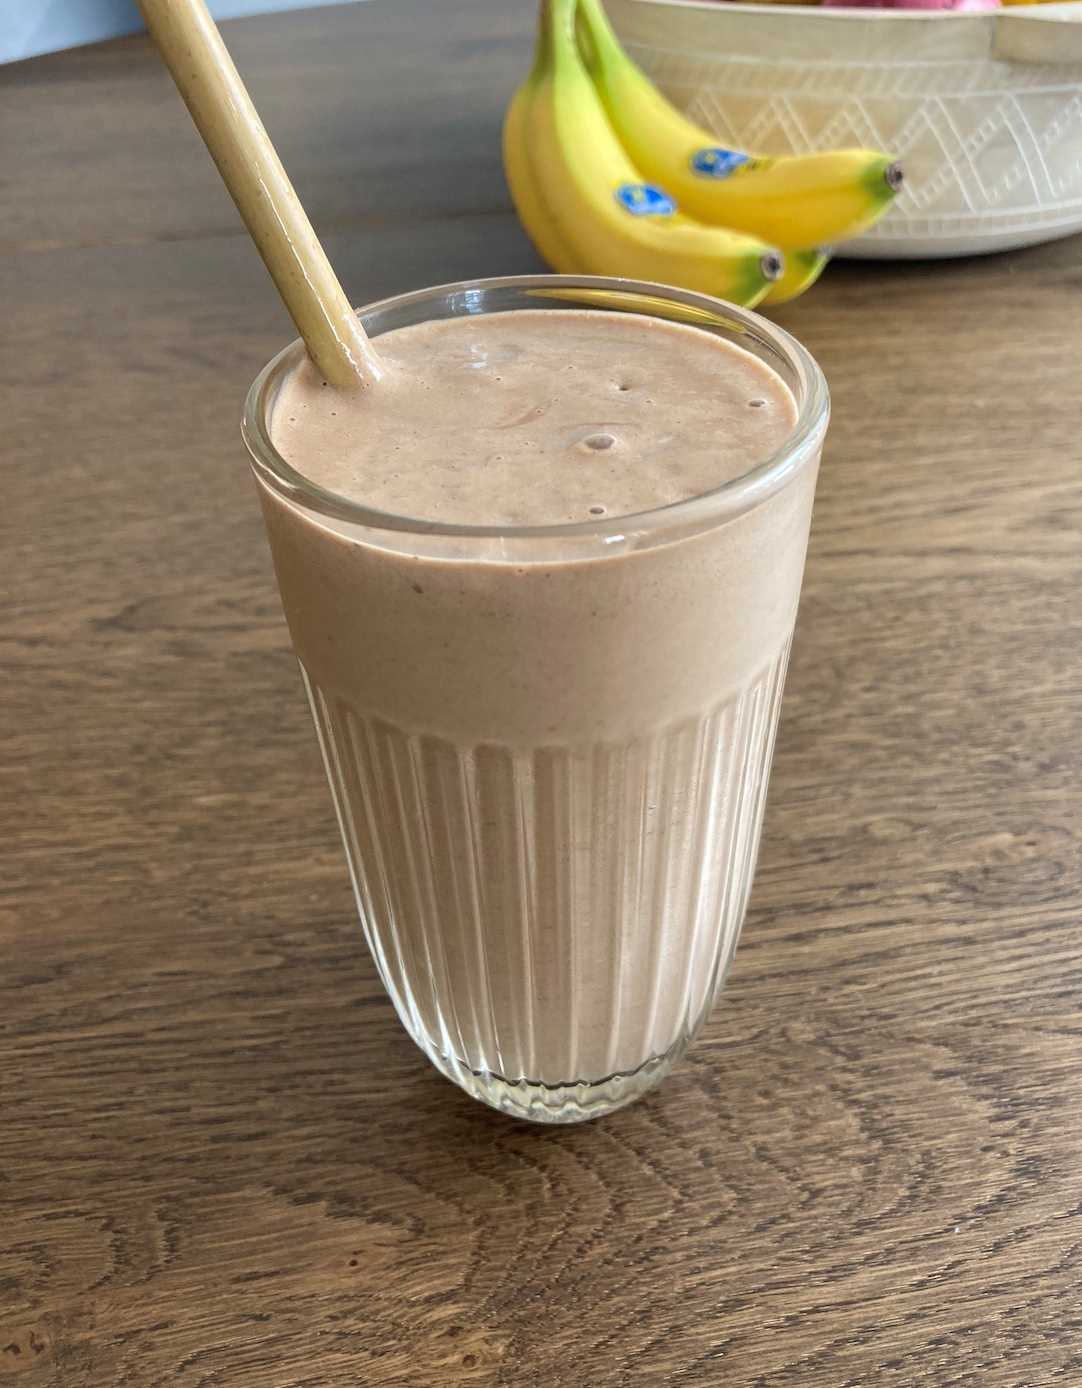 Creamy Avocado Peanut Butter Smoothie The Heart Dietitian 0879